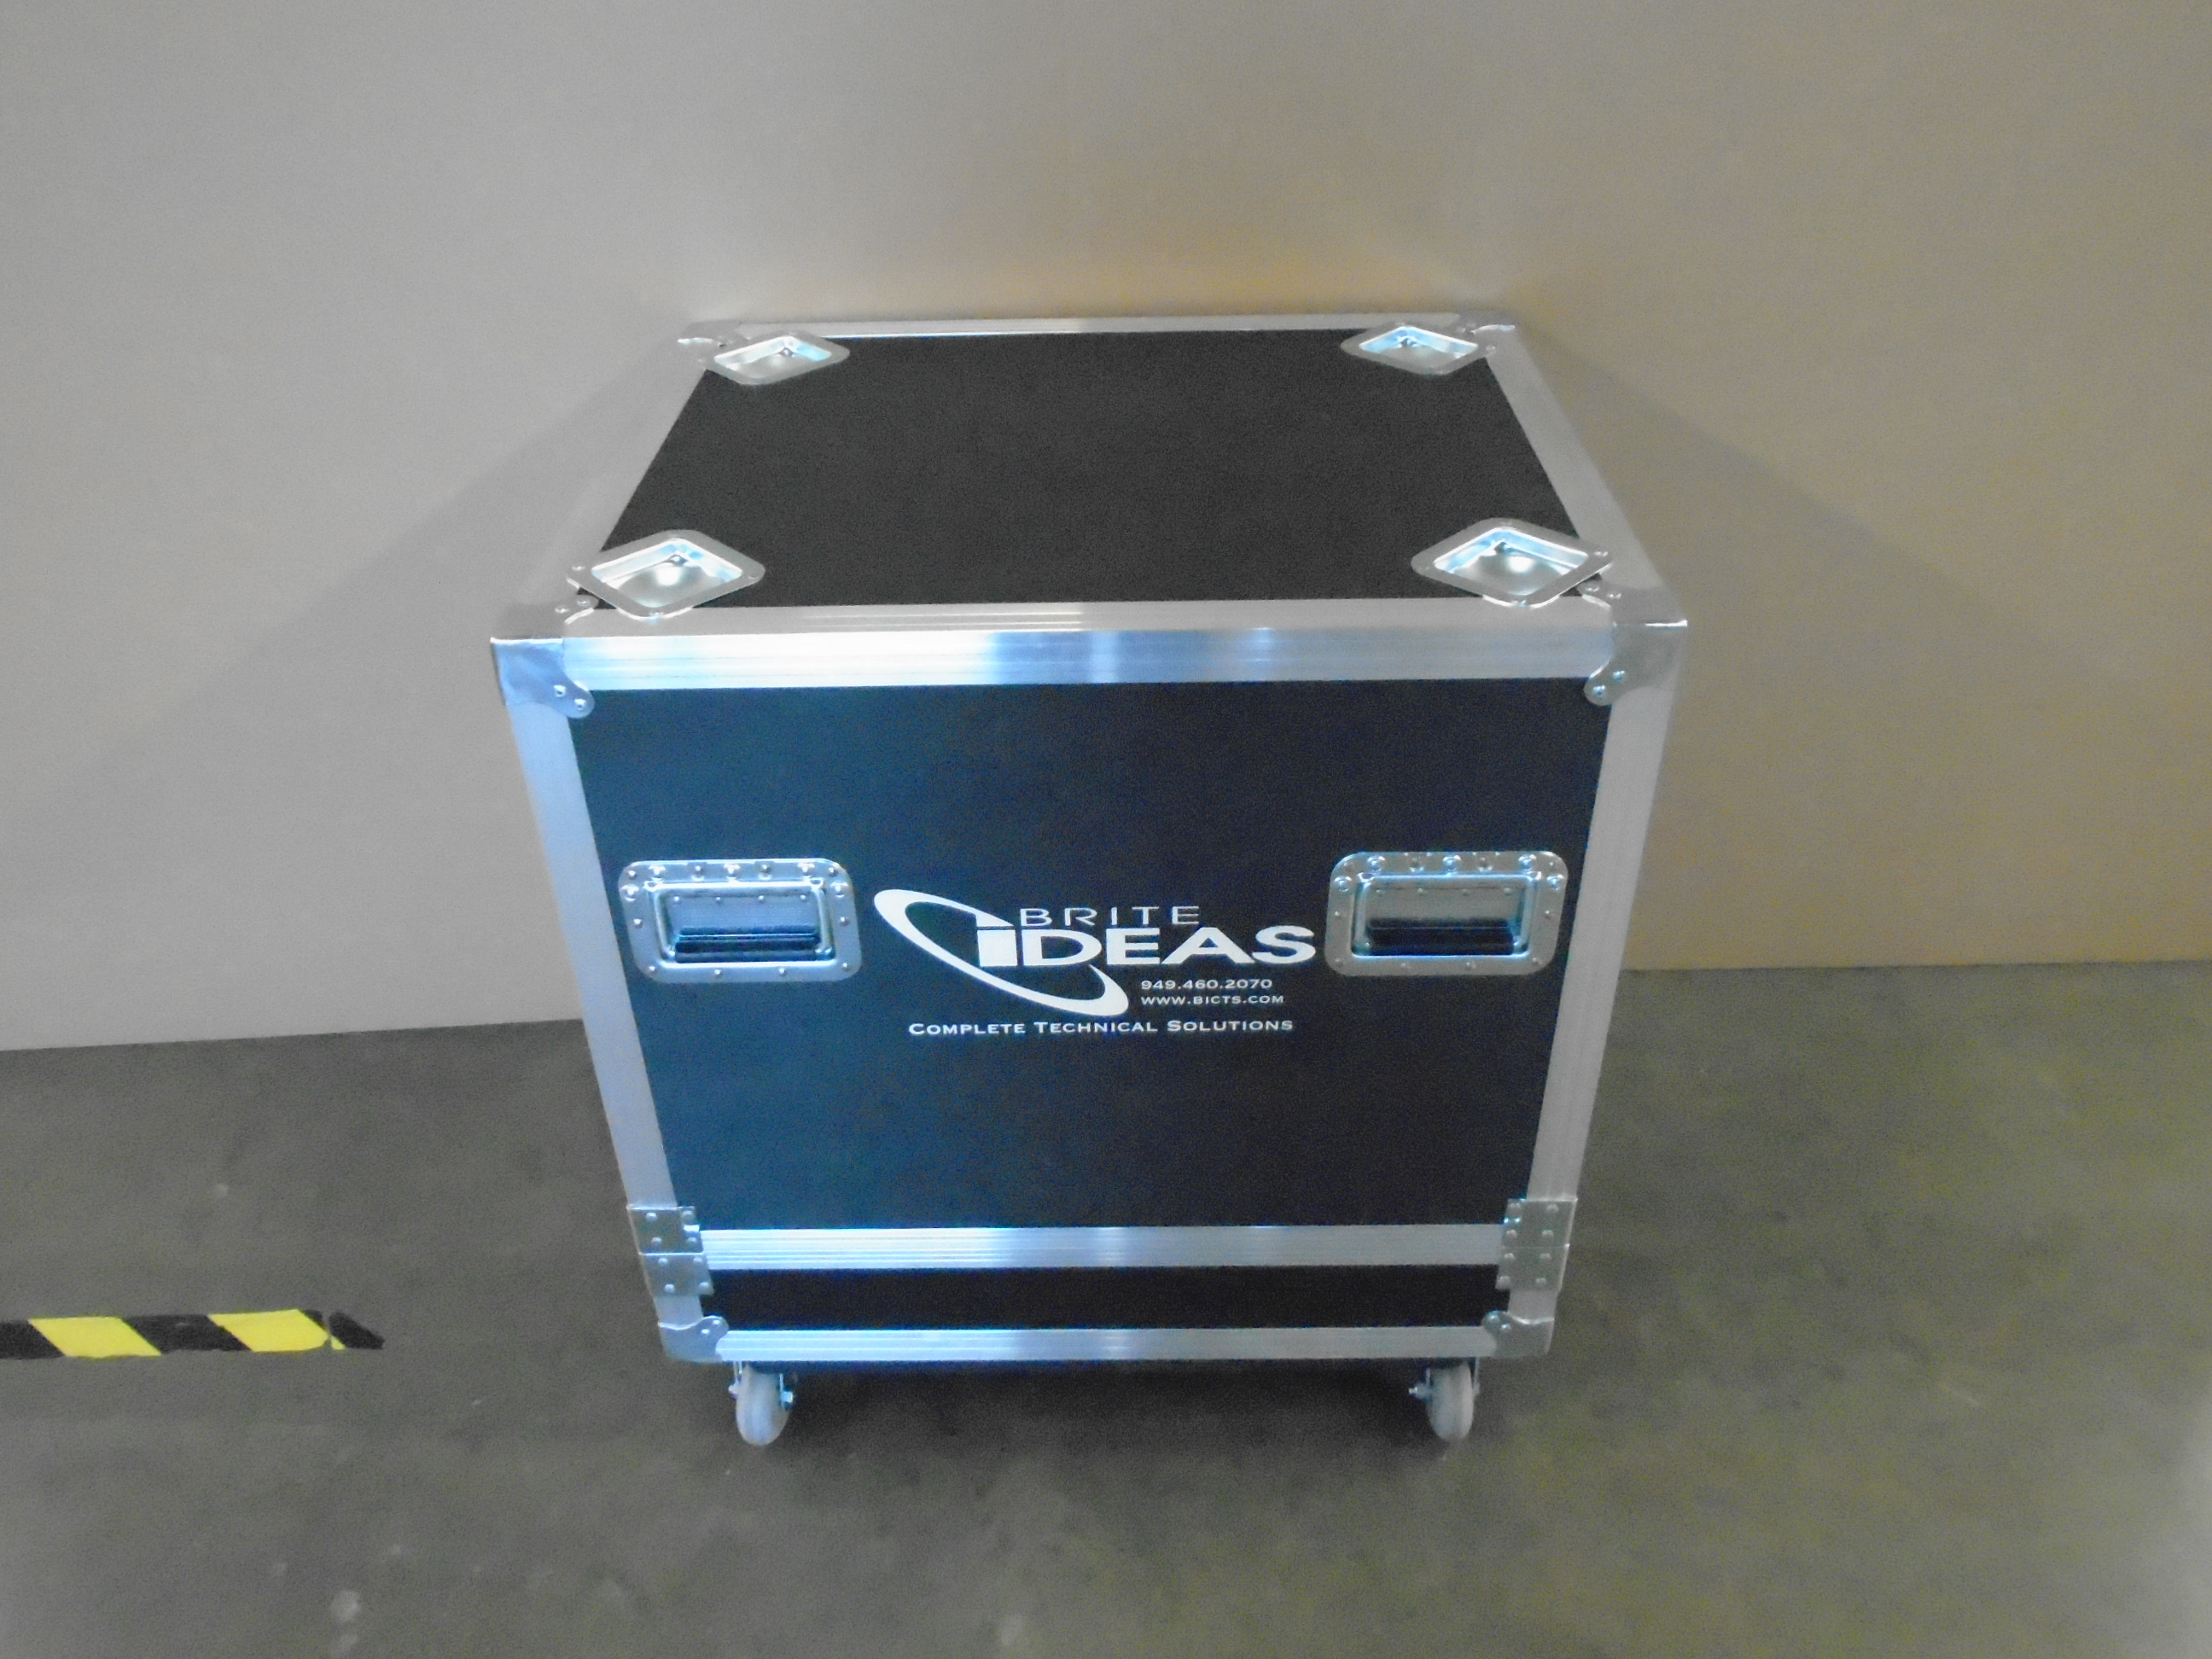 Print # 8173 - Custom Road Case for 2-Pack D&B Audiotechnik M4 Professional Stage Monitor Kit By Nelson Case Corp